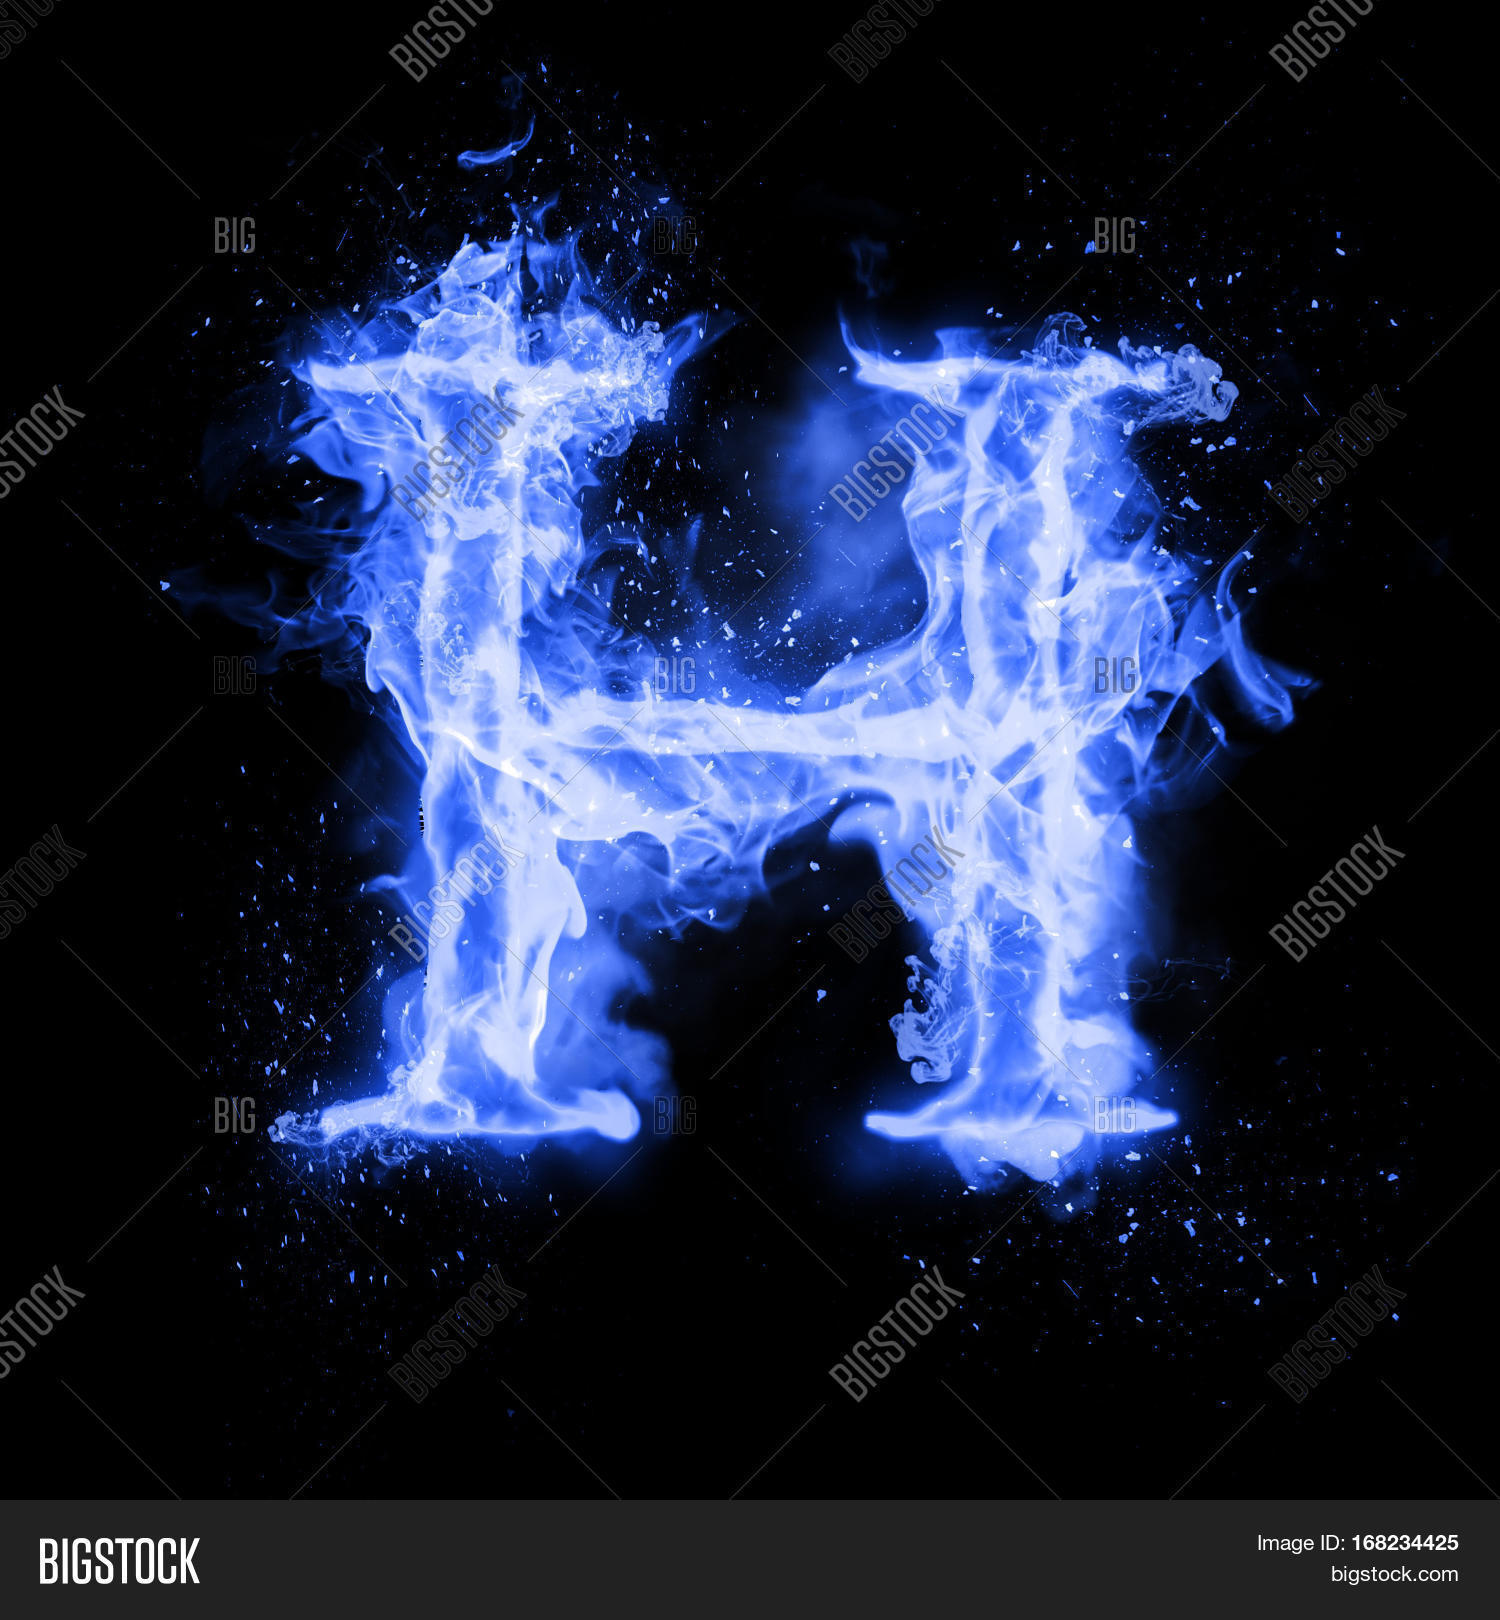 Fire Letter H Burning Blue Flame. Image & Photo | Bigstock